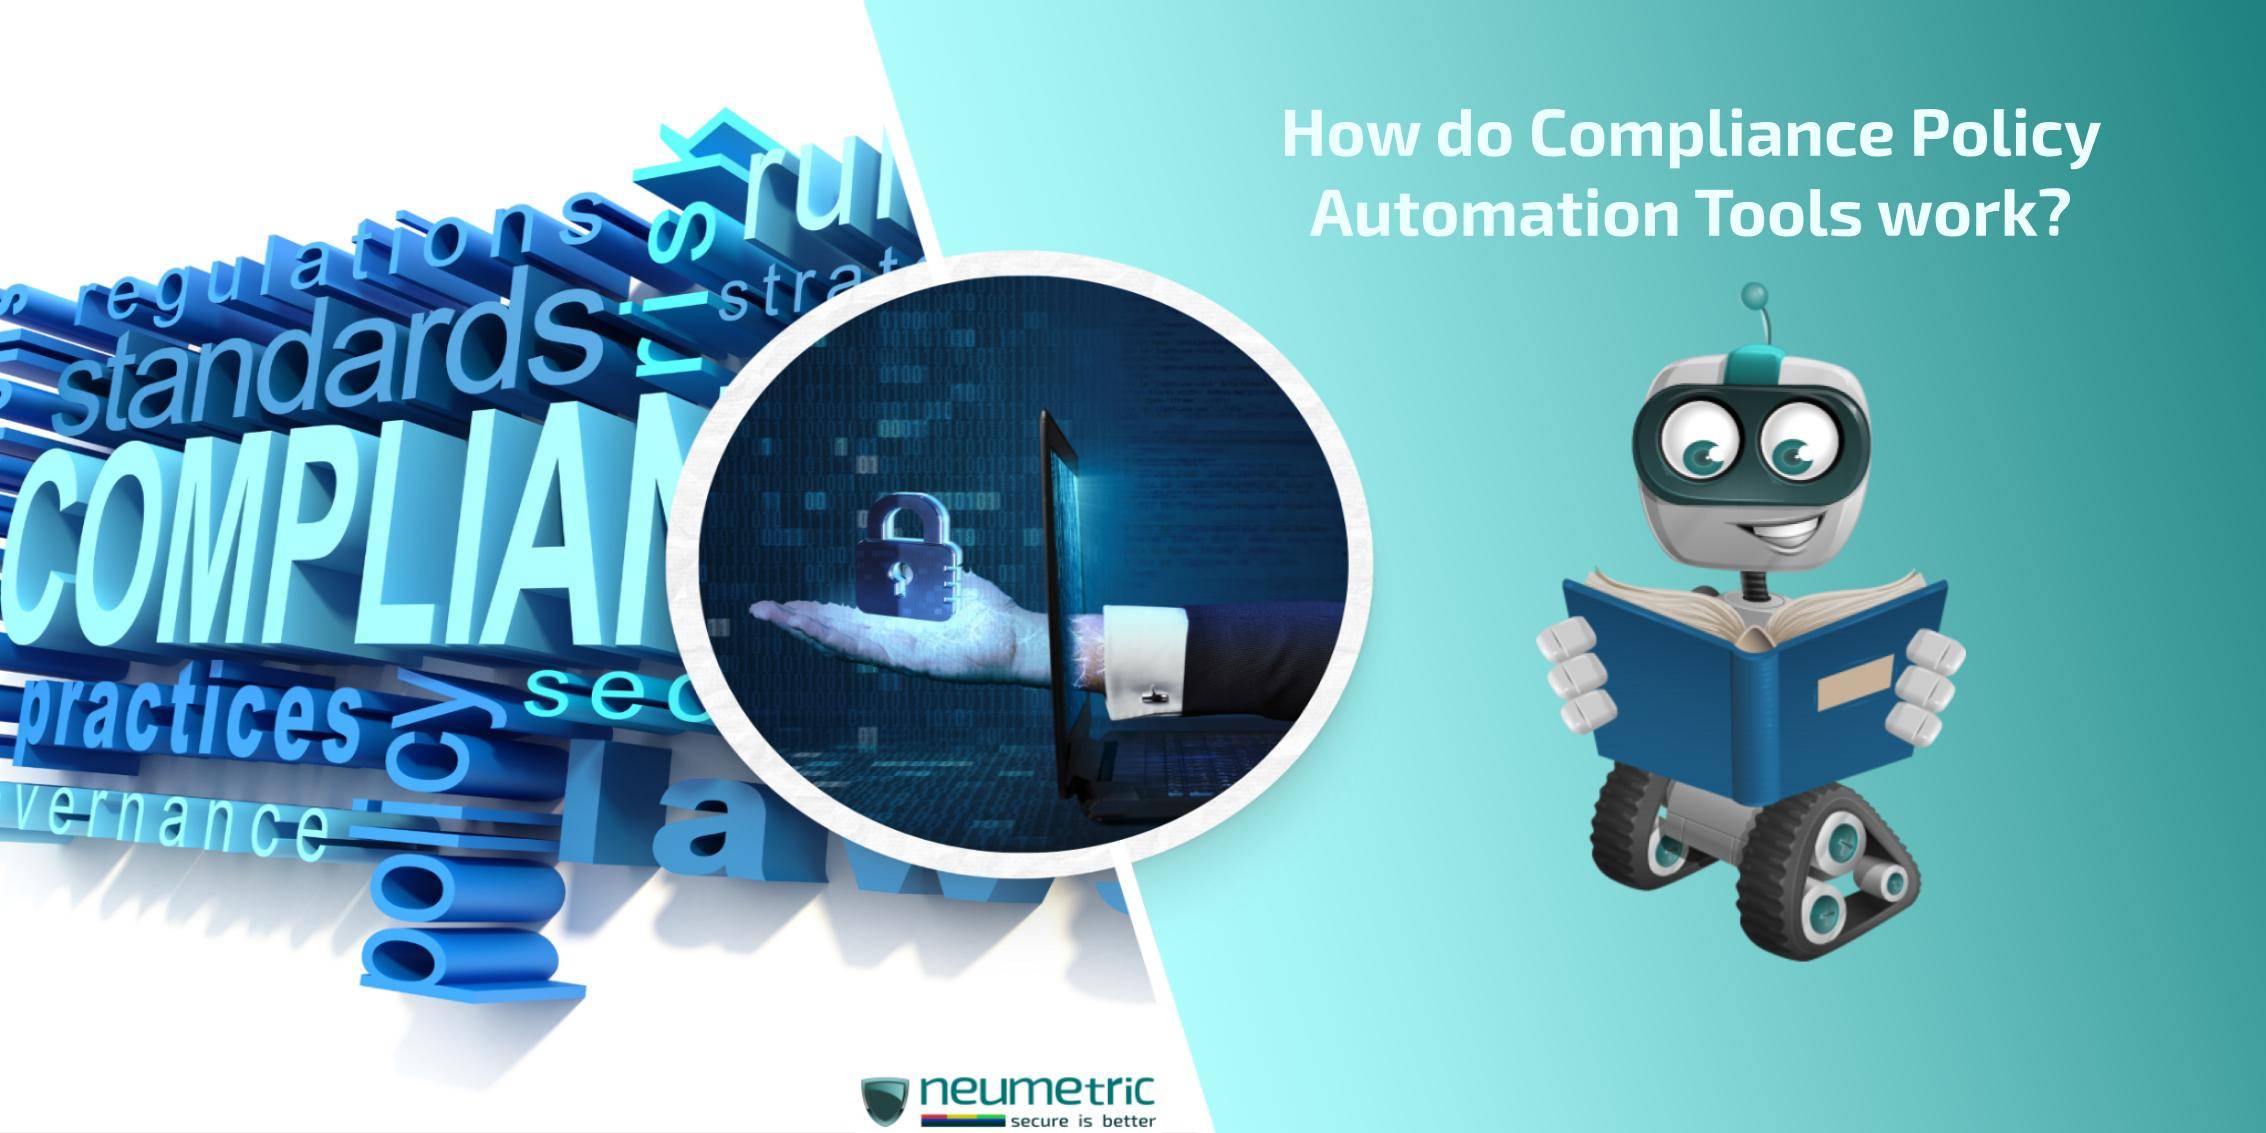 Compliance policy automation tools